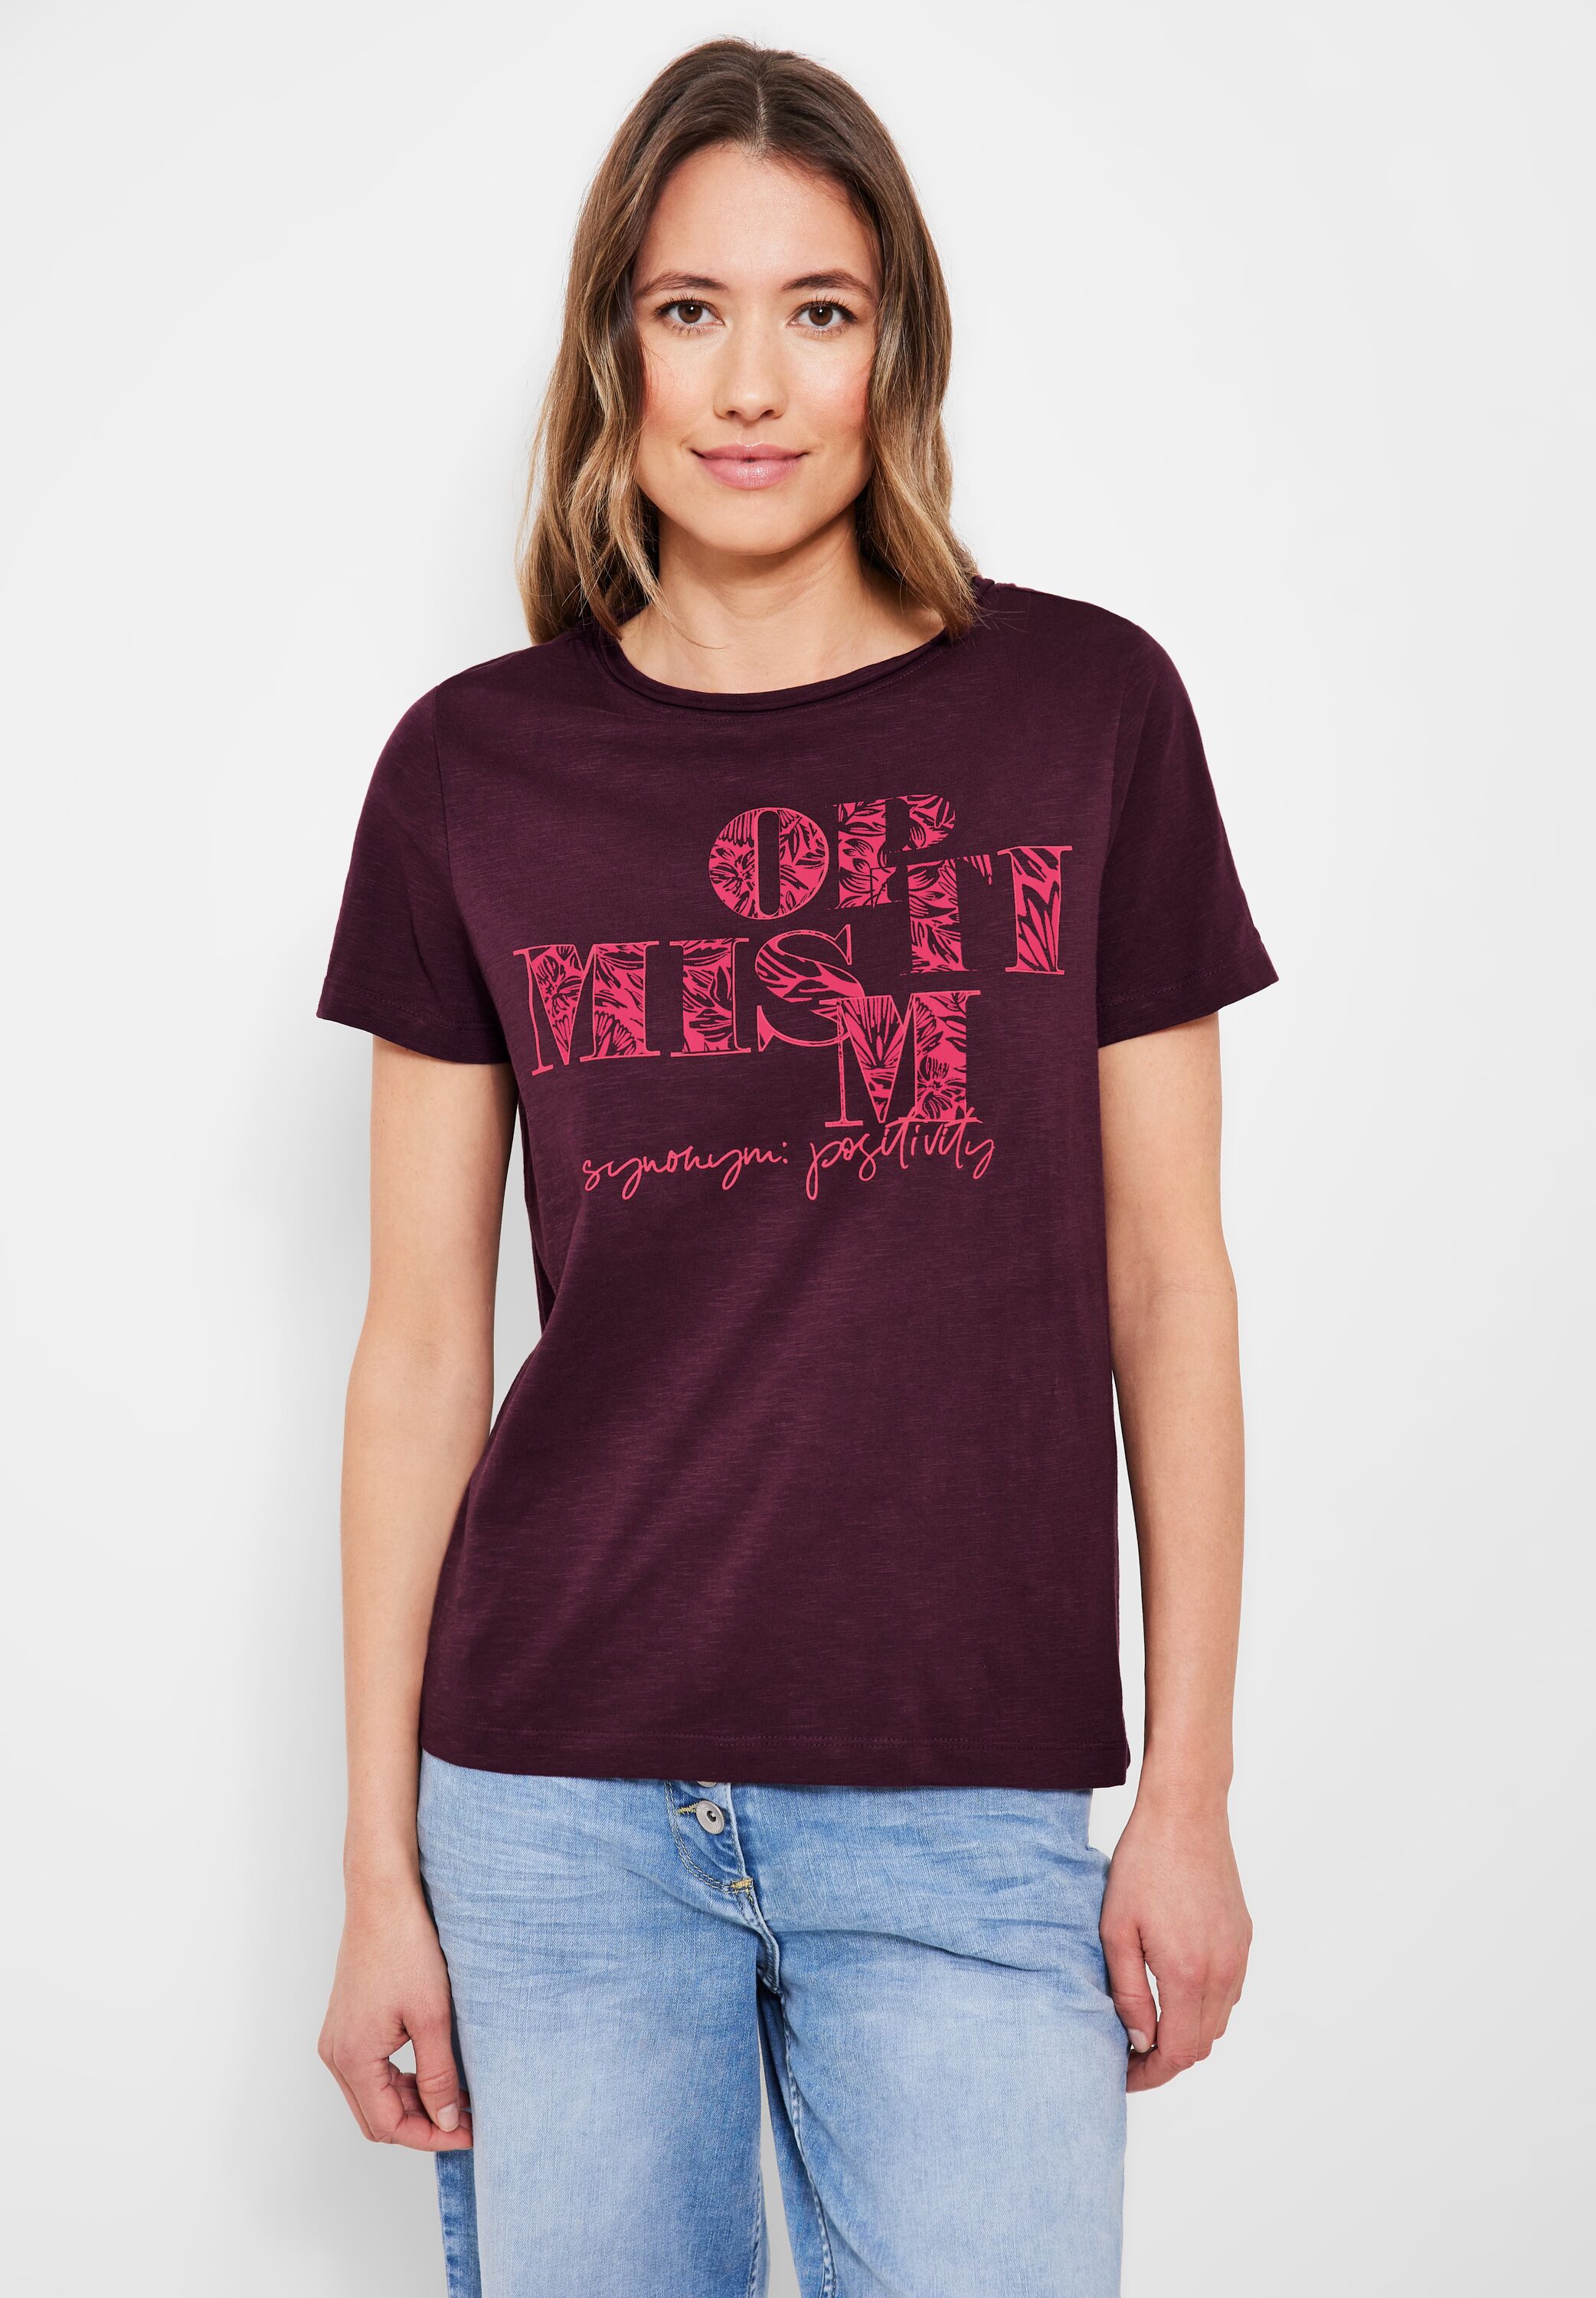 CECIL T-Shirt in Wineberry SALE - Red im B319637-34918 Mode CONCEPT reduziert